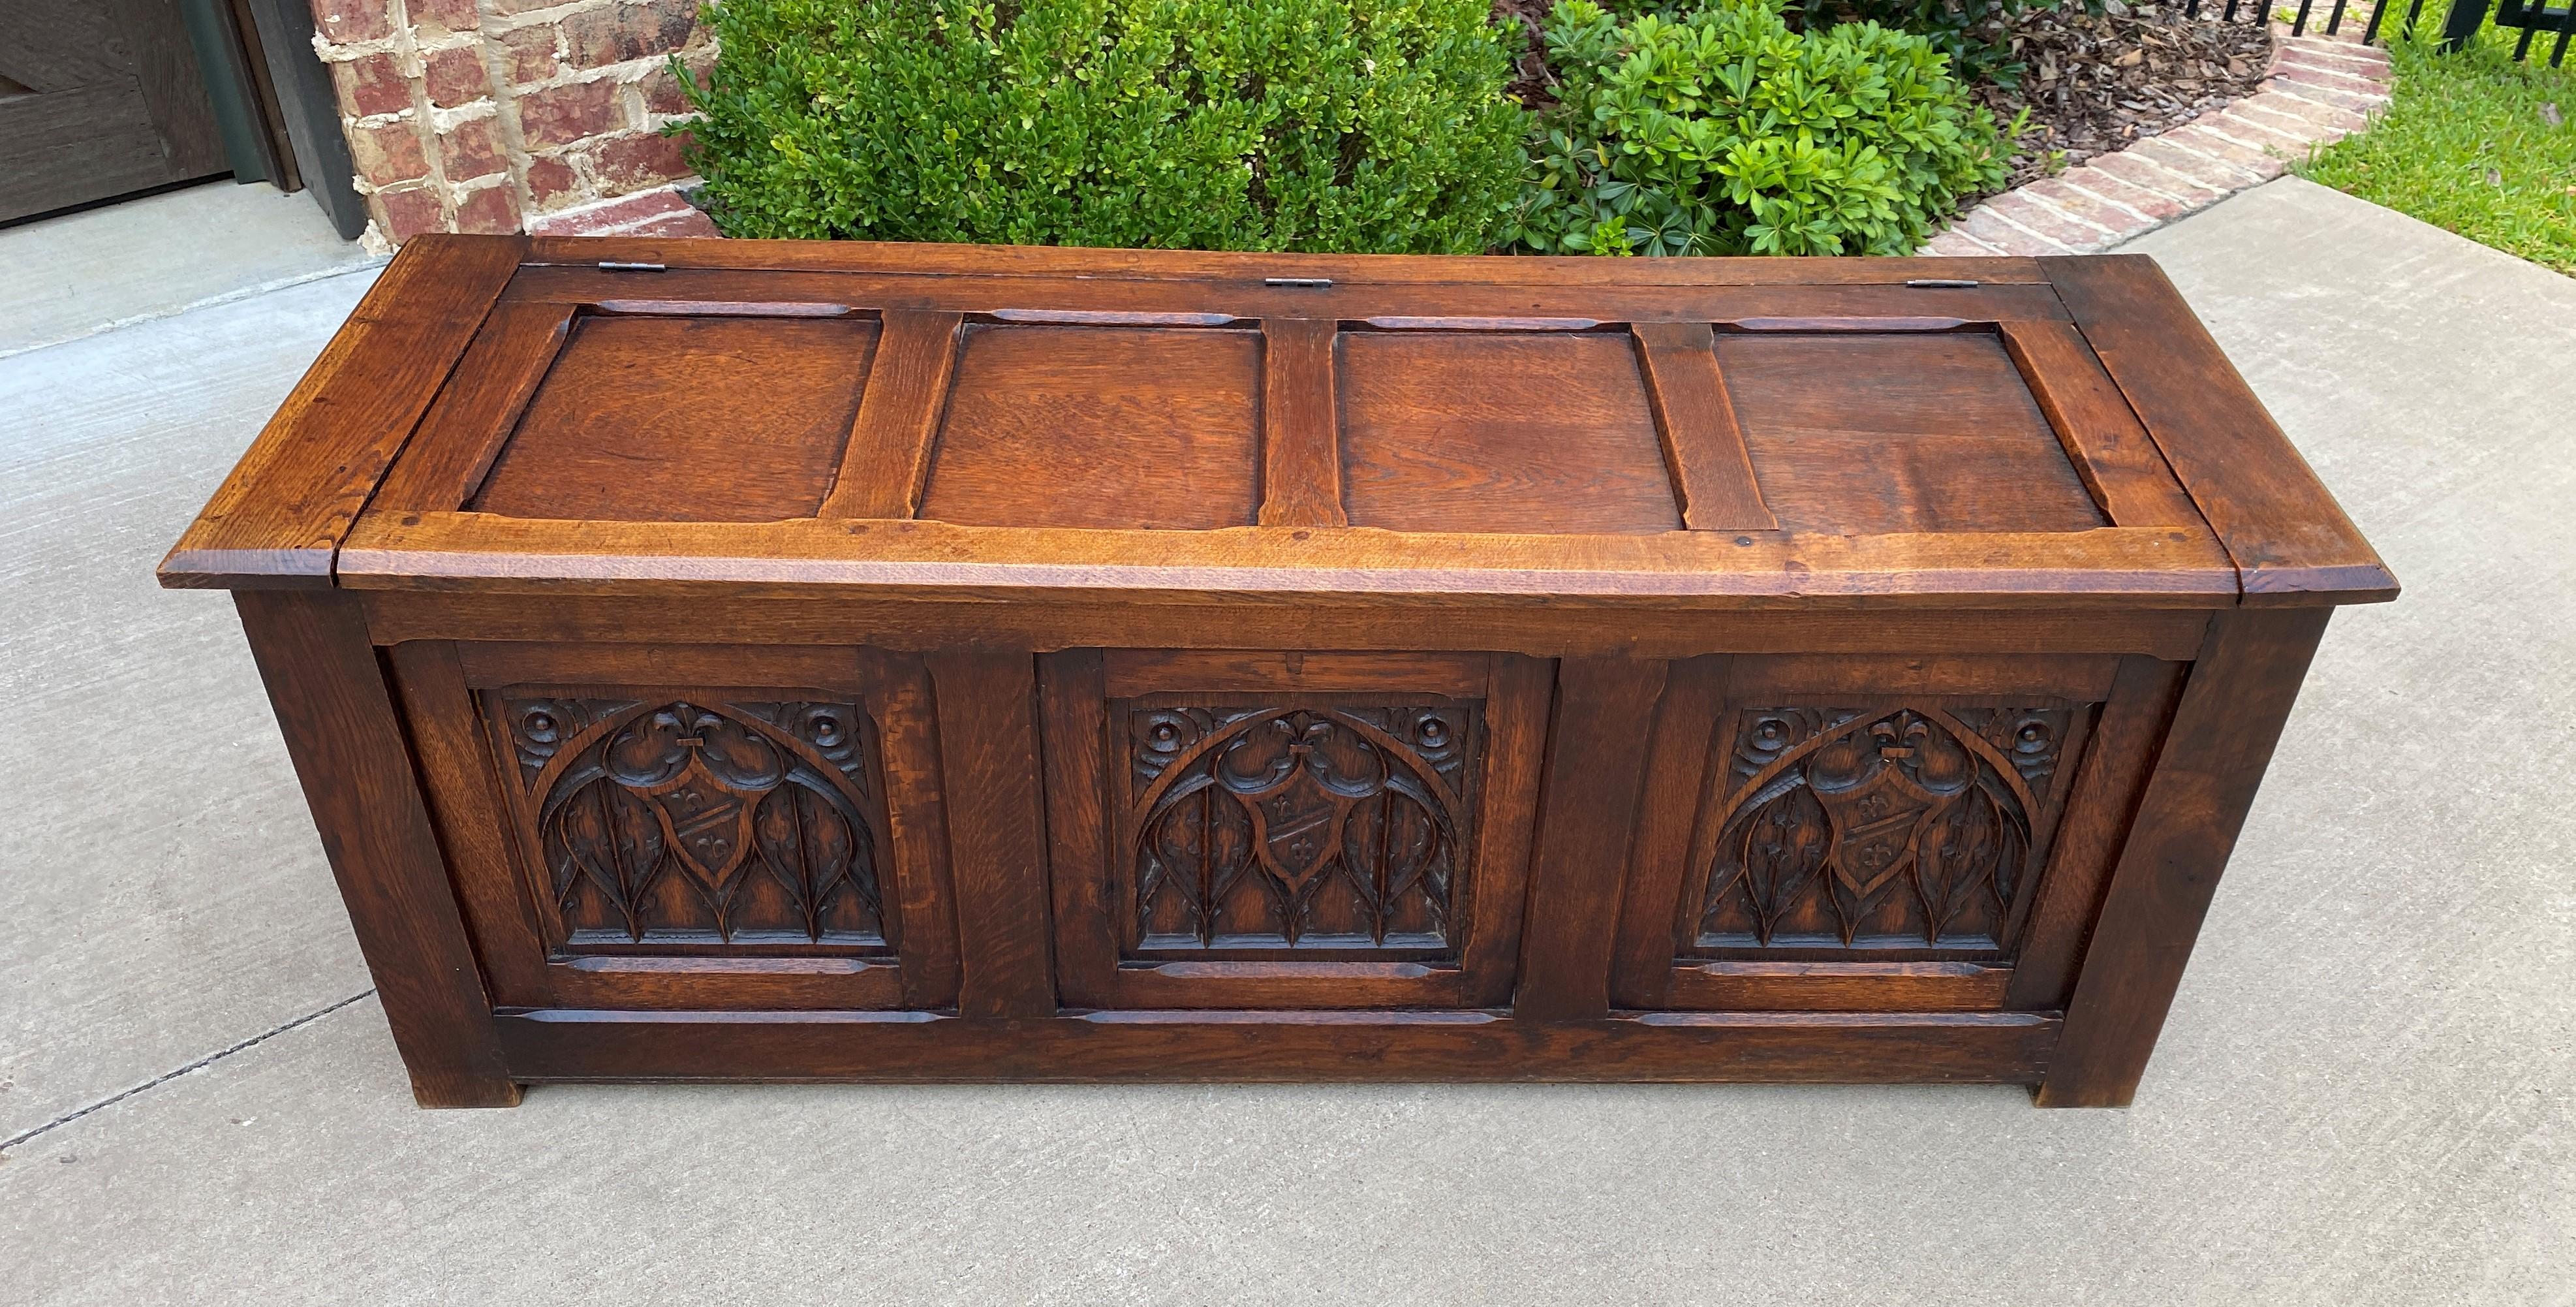 Gothic Revival Antique French Trunk Blanket Box Coffee Table Chest Oak Gothic Shields, c.1920s